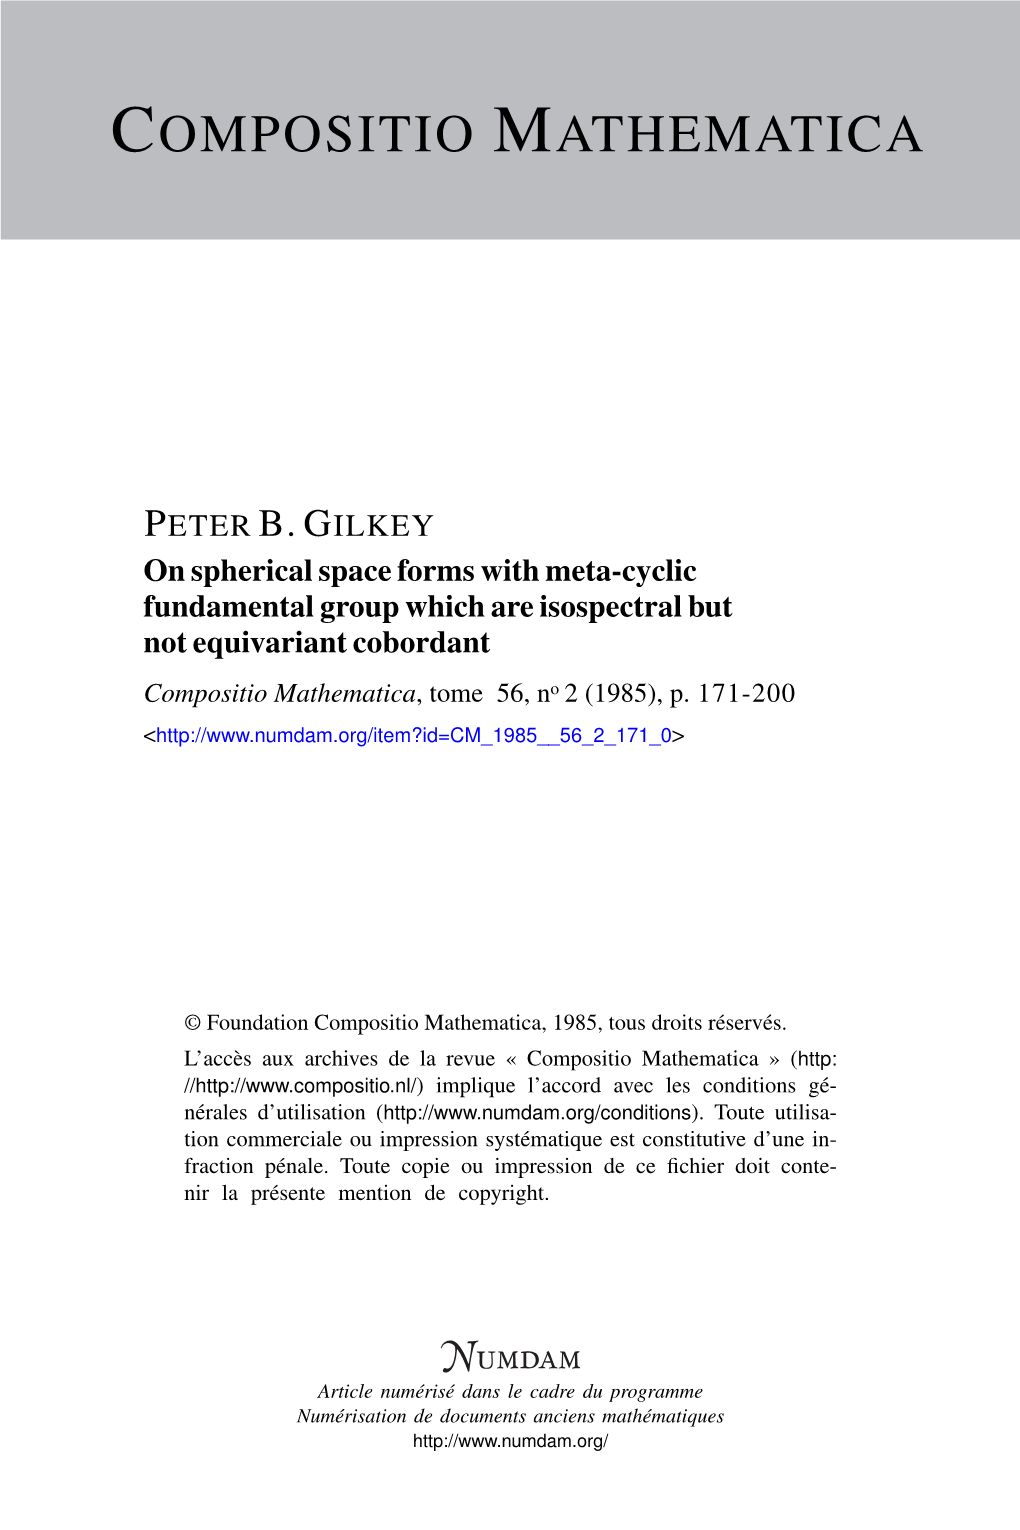 On Spherical Space Forms with Meta-Cyclic Fundamental Group Which Are Isospectral but Not Equivariant Cobordant Compositio Mathematica, Tome 56, No 2 (1985), P